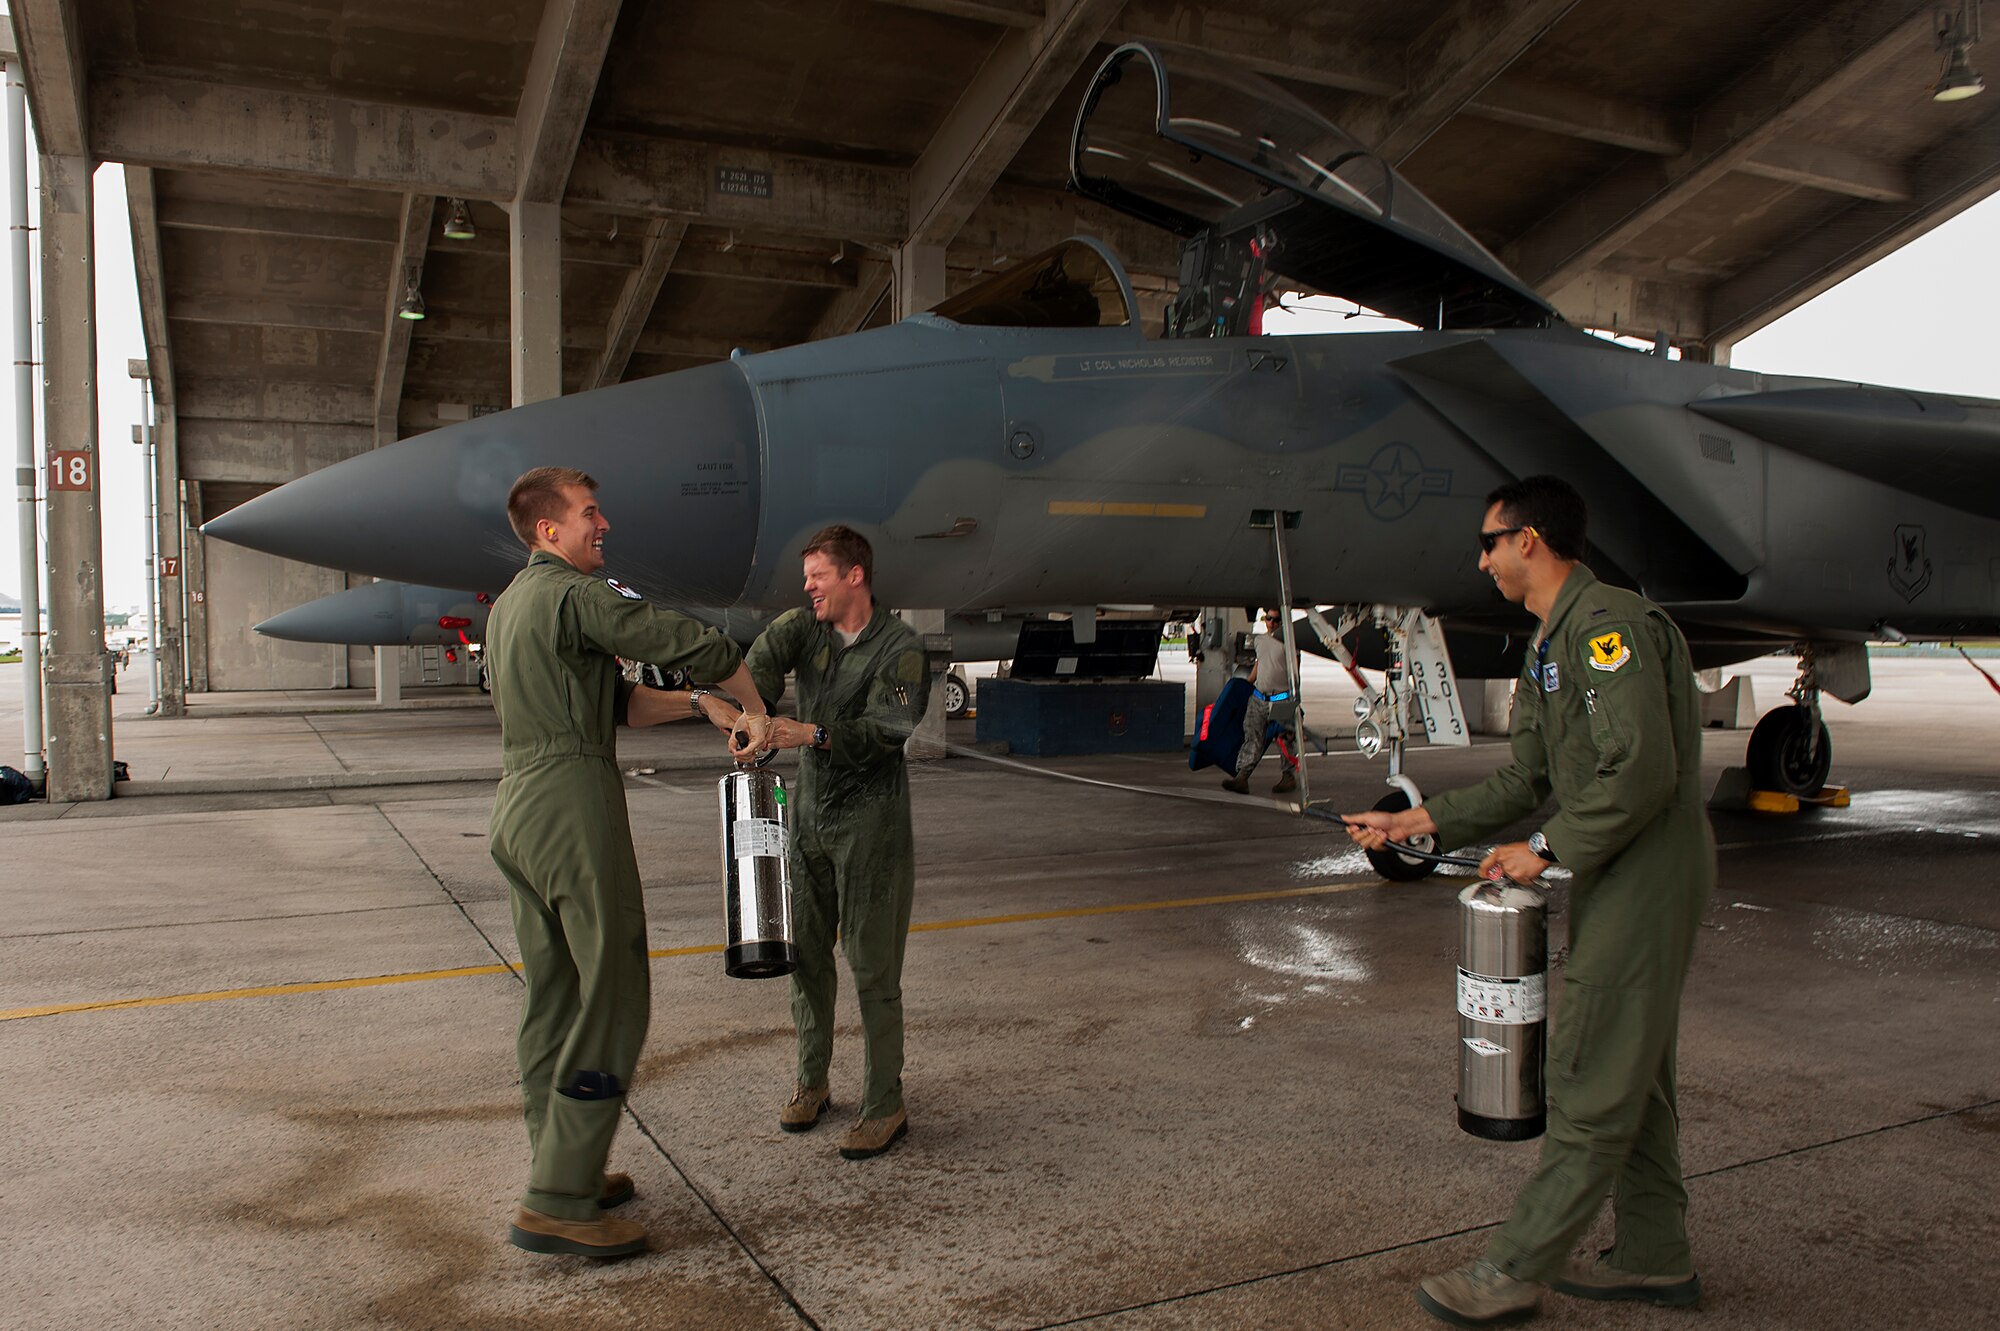 U.S. Air Force Lt. Col. Alexander Haddad, 44th Fighter Squadron pilot, gets sprayed with water by 1st Lt. Maxwell Anthony (left) and 1st Lt. Michael Tope (right), 44th FS pilots, after Haddad reached 2,000 flying hours, Nov. 19, 2015, at Kadena Air Base, Japan. It is a tradition for pilots to get sprayed down with water after reaching a significant milestone.. (U.S. Air Force photo by Airman 1st Class Corey M. Pettis)